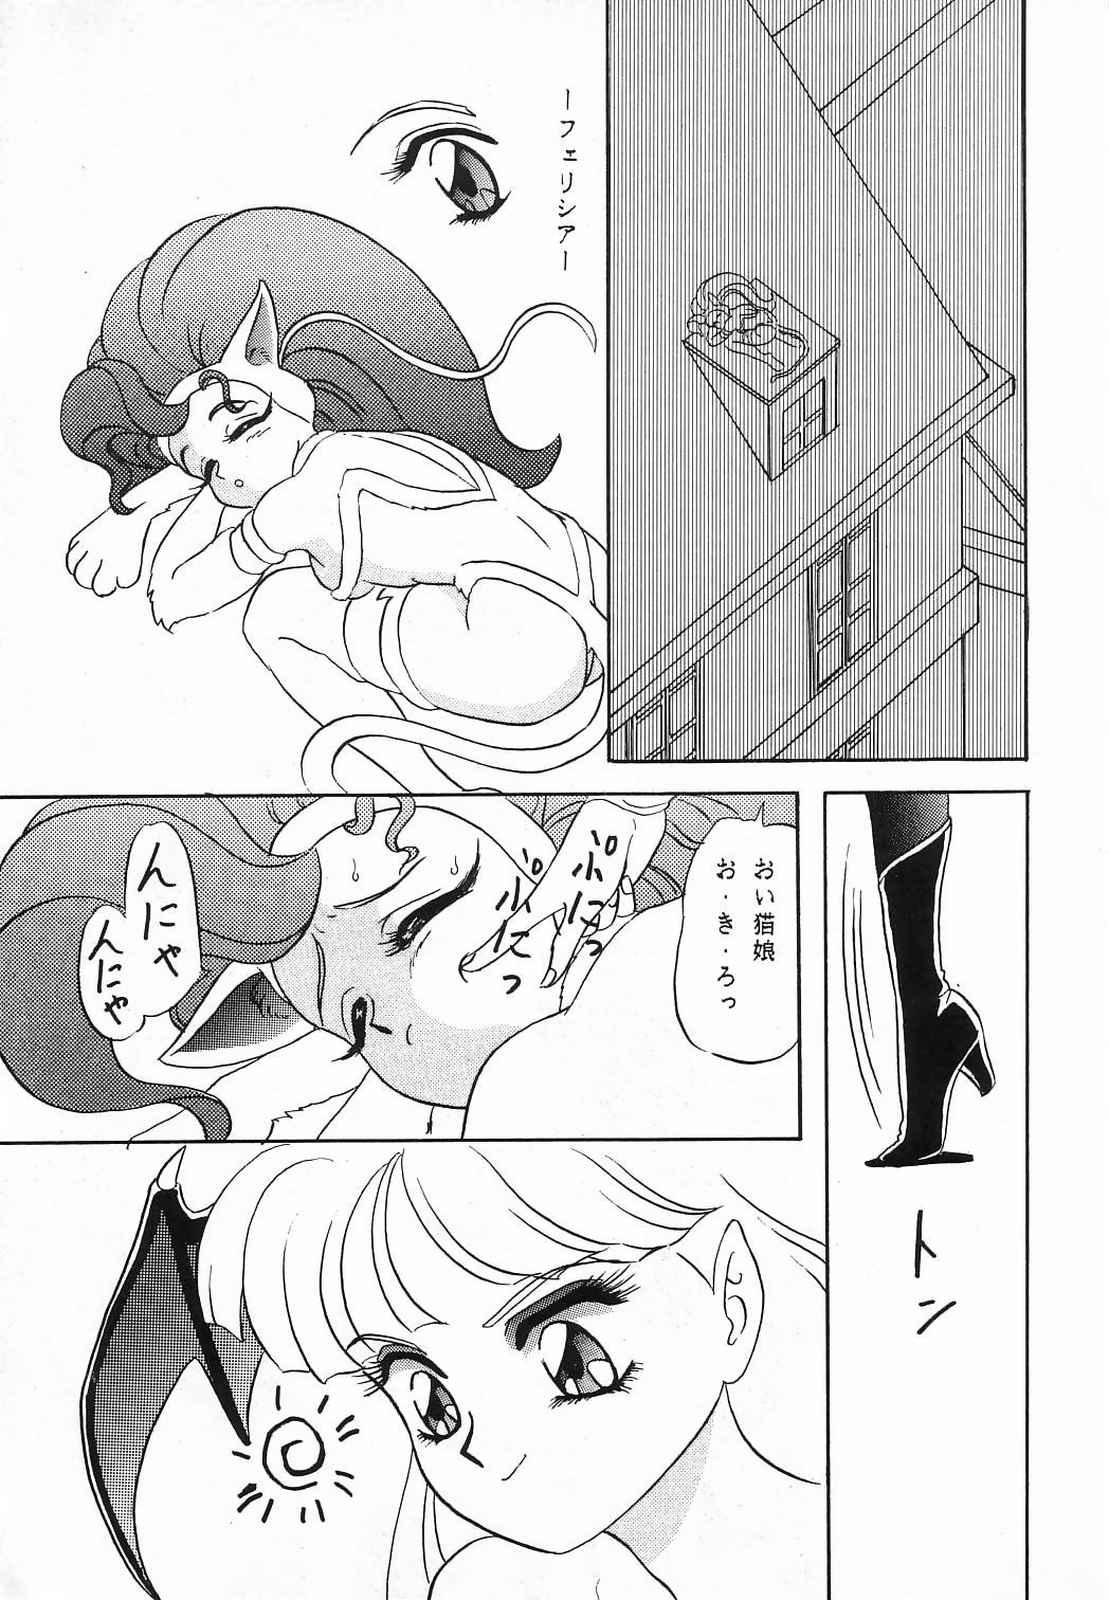 Japan Lunch Box 10 - Lunch Time 2 - Sailor moon Darkstalkers Porno Amateur - Page 7